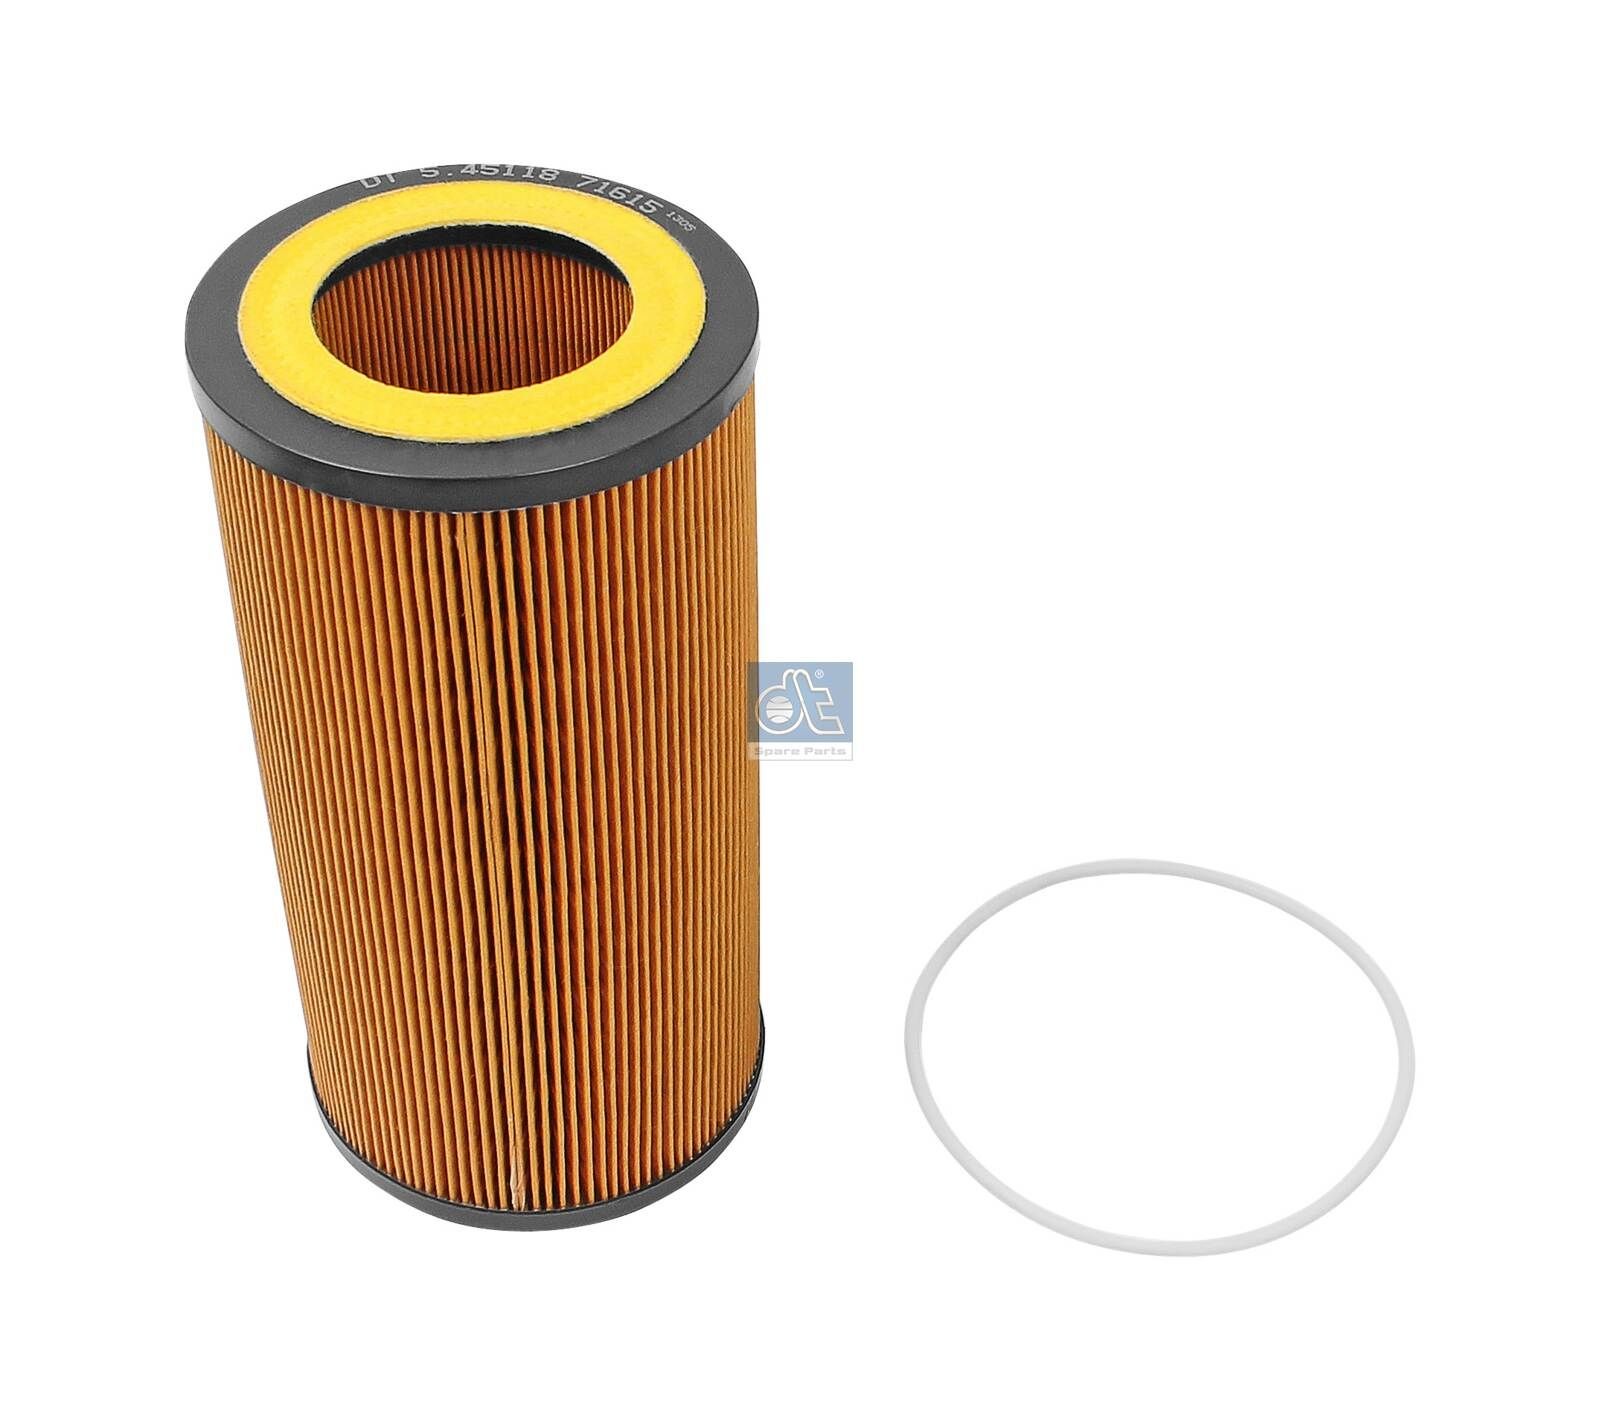 HU 1297 x DT Spare Parts with seal, Filter Insert Oil filters 5.45118 buy